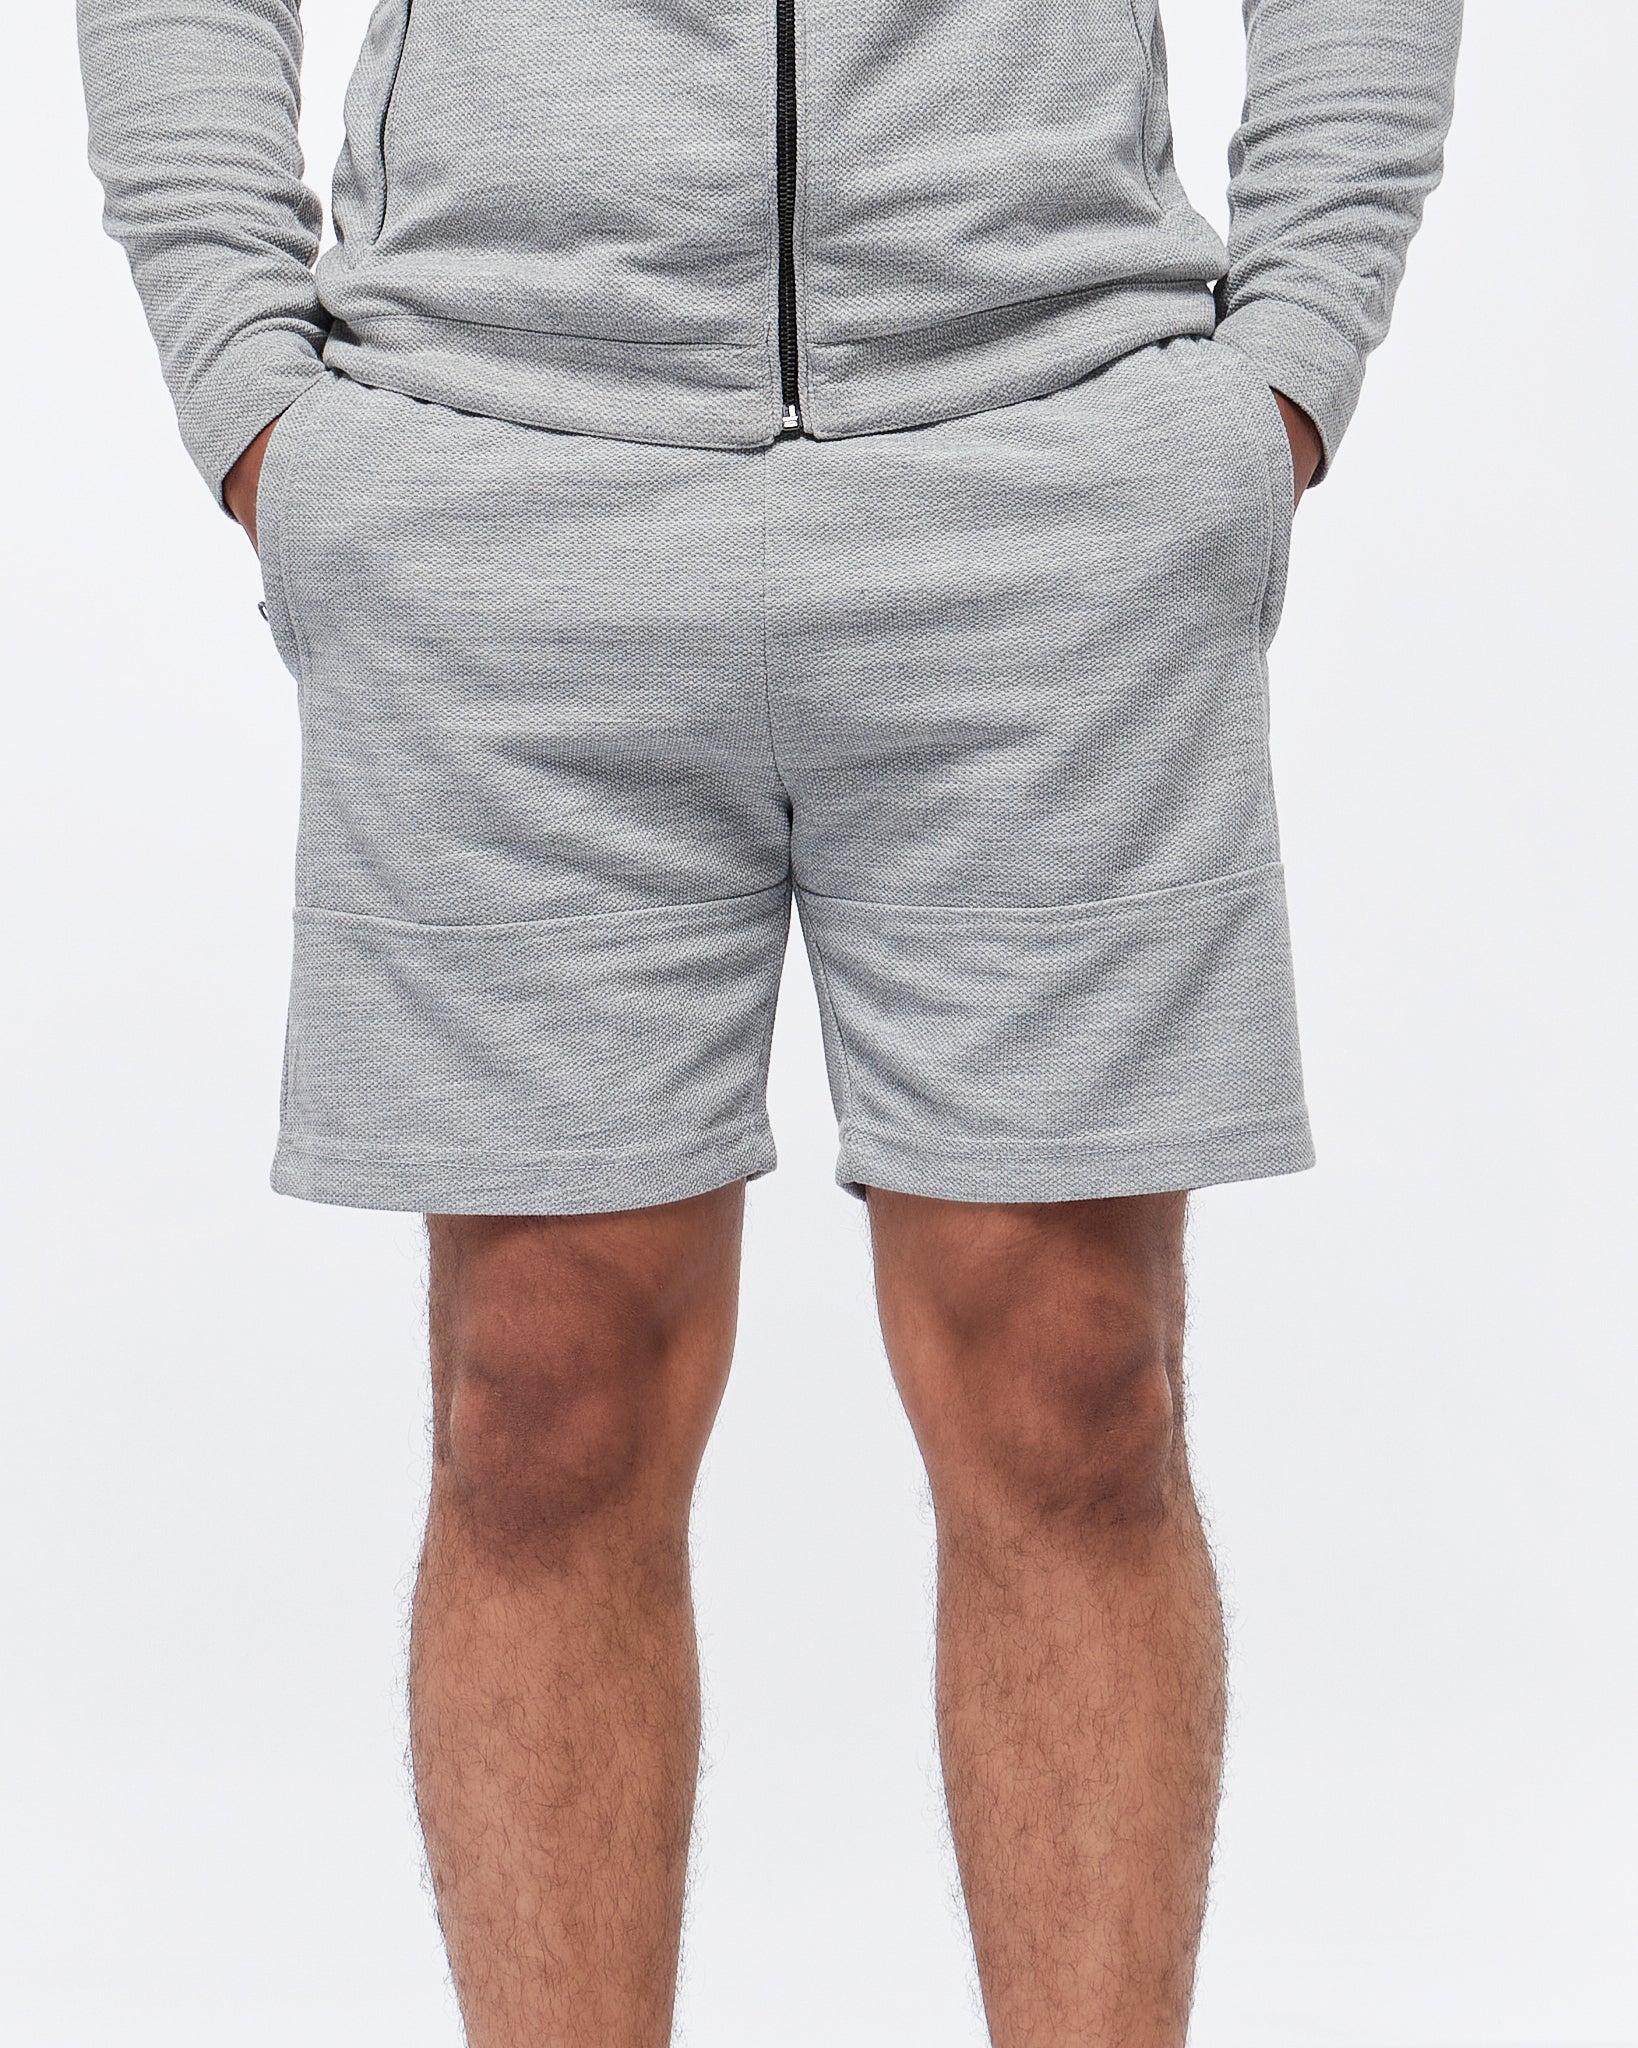 MOI OUTFIT-Casual Fit Men Shorts 17.50